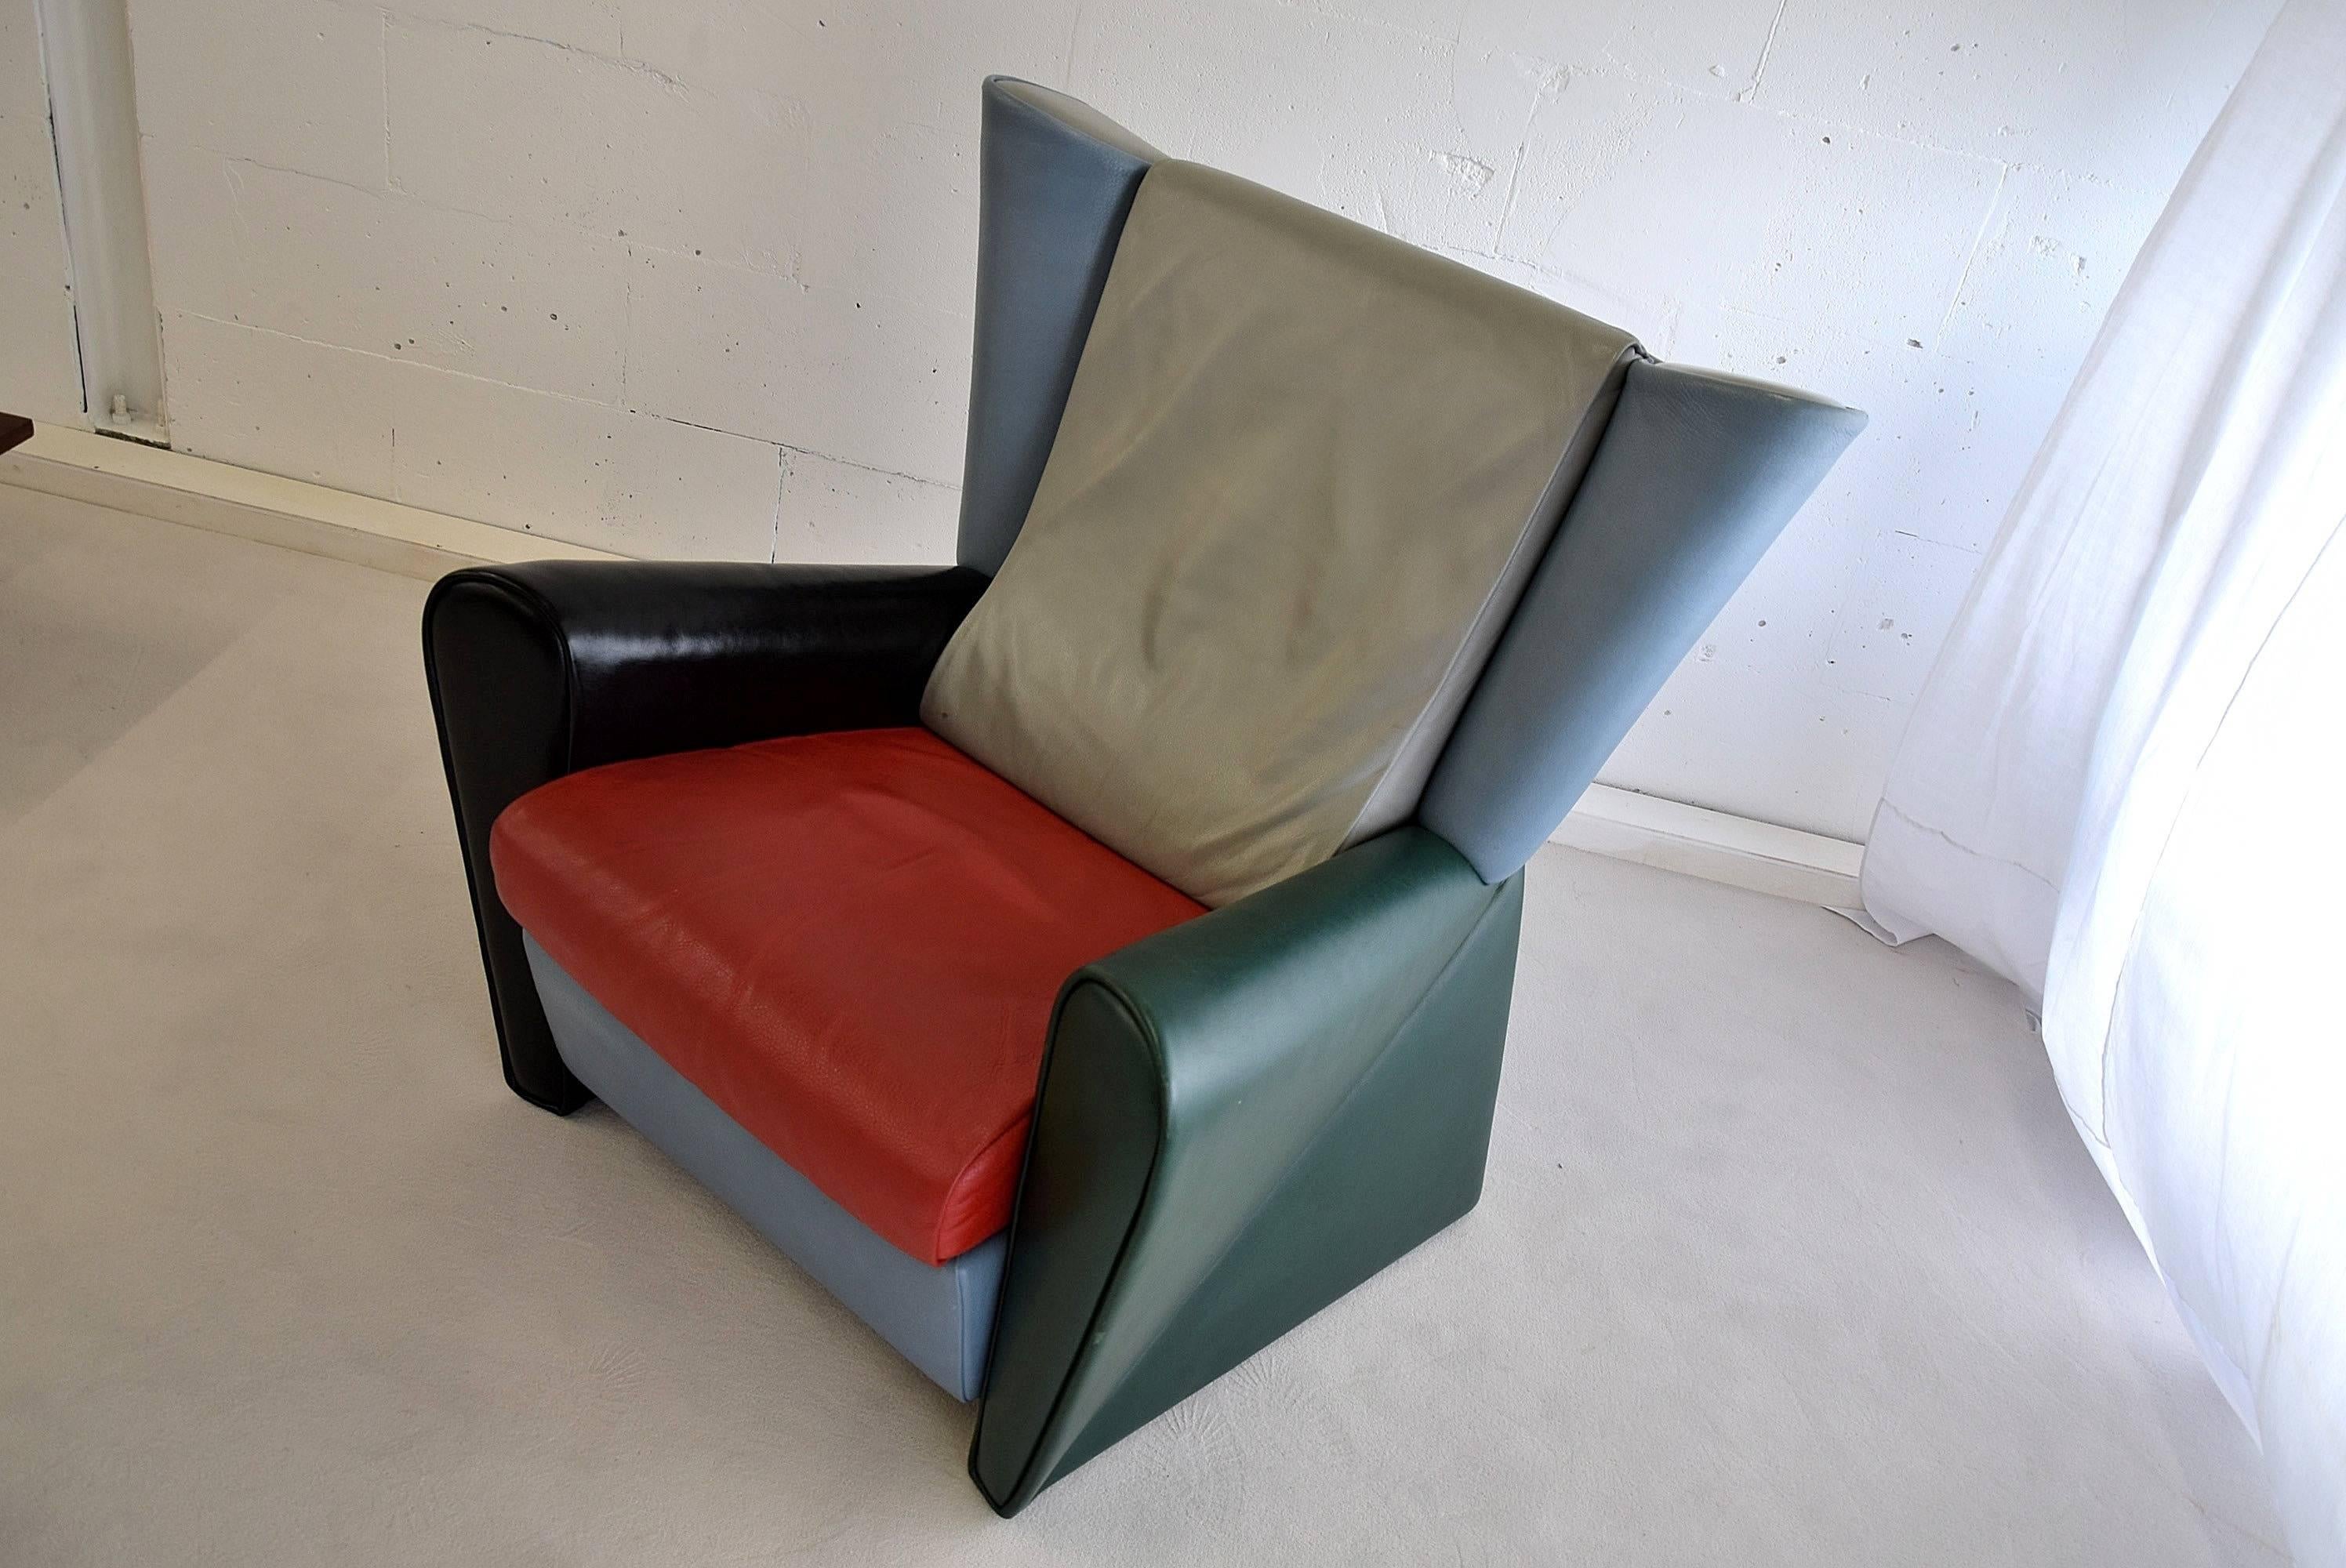 Late 20th Century Italian Post Modern Alessandro Mendini Multi Color Leather Lounge Chair For Sale